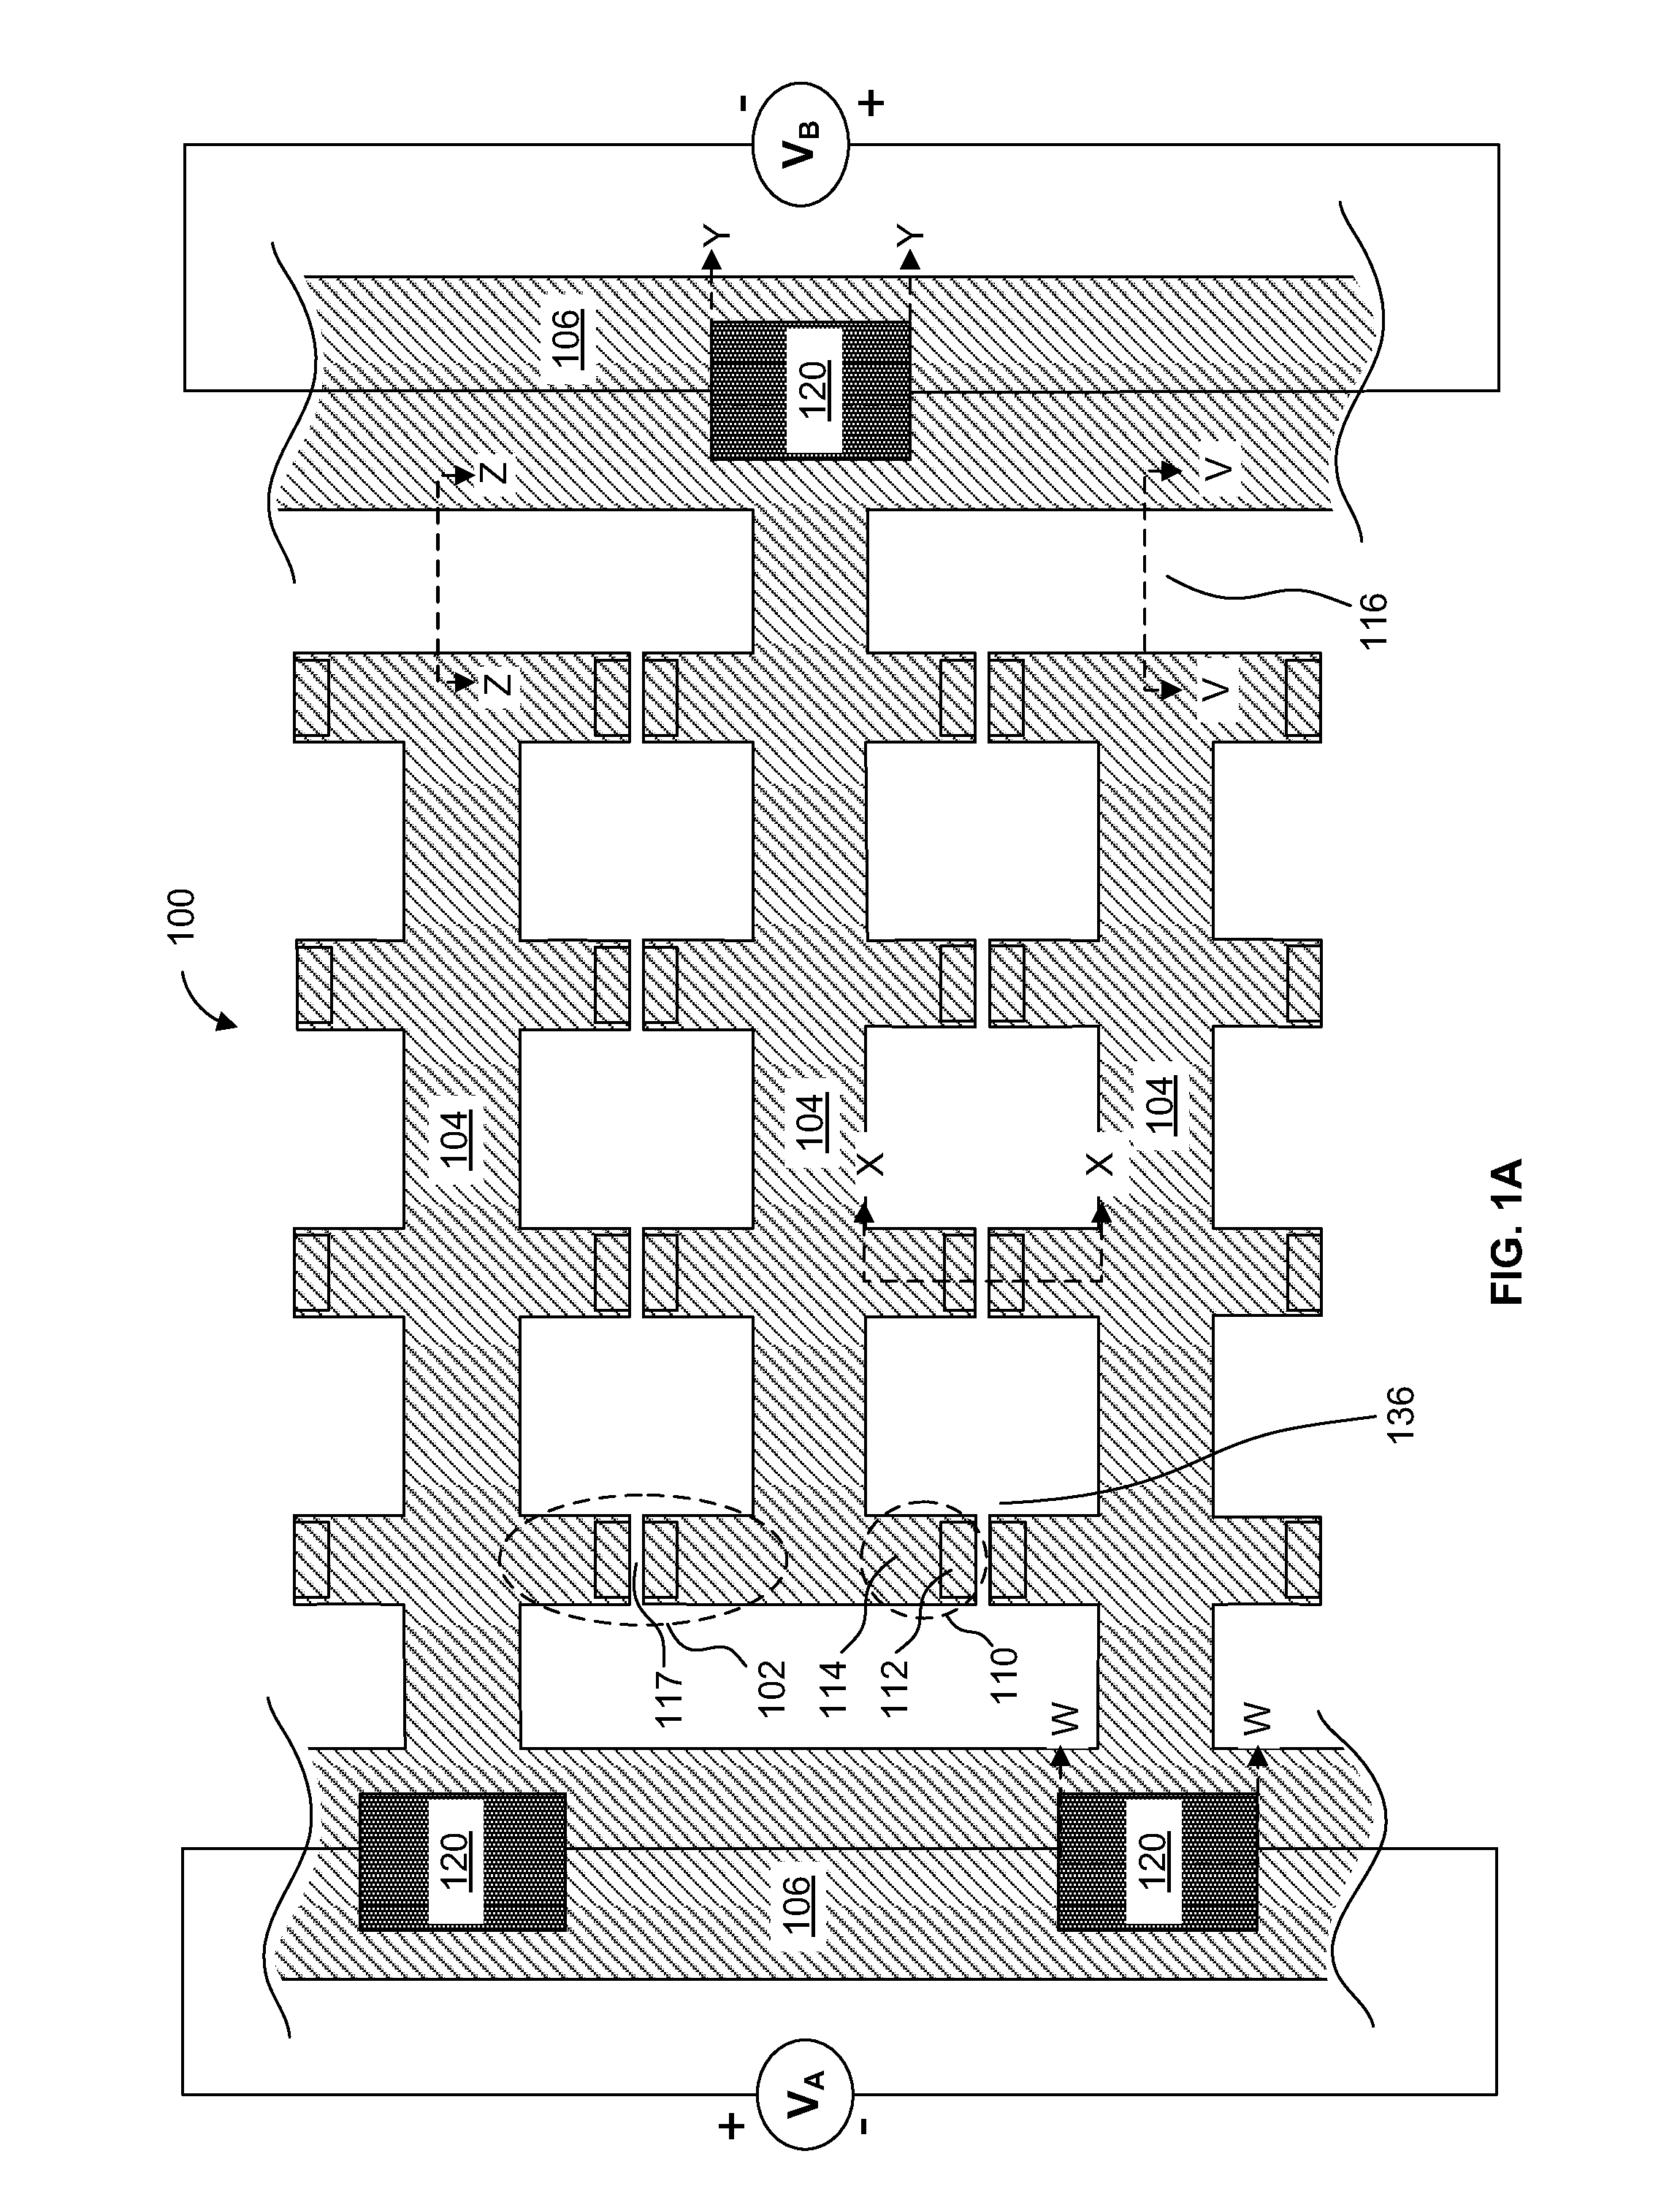 Method of forming a compliant bipolar micro device transfer head with silicon electrodes